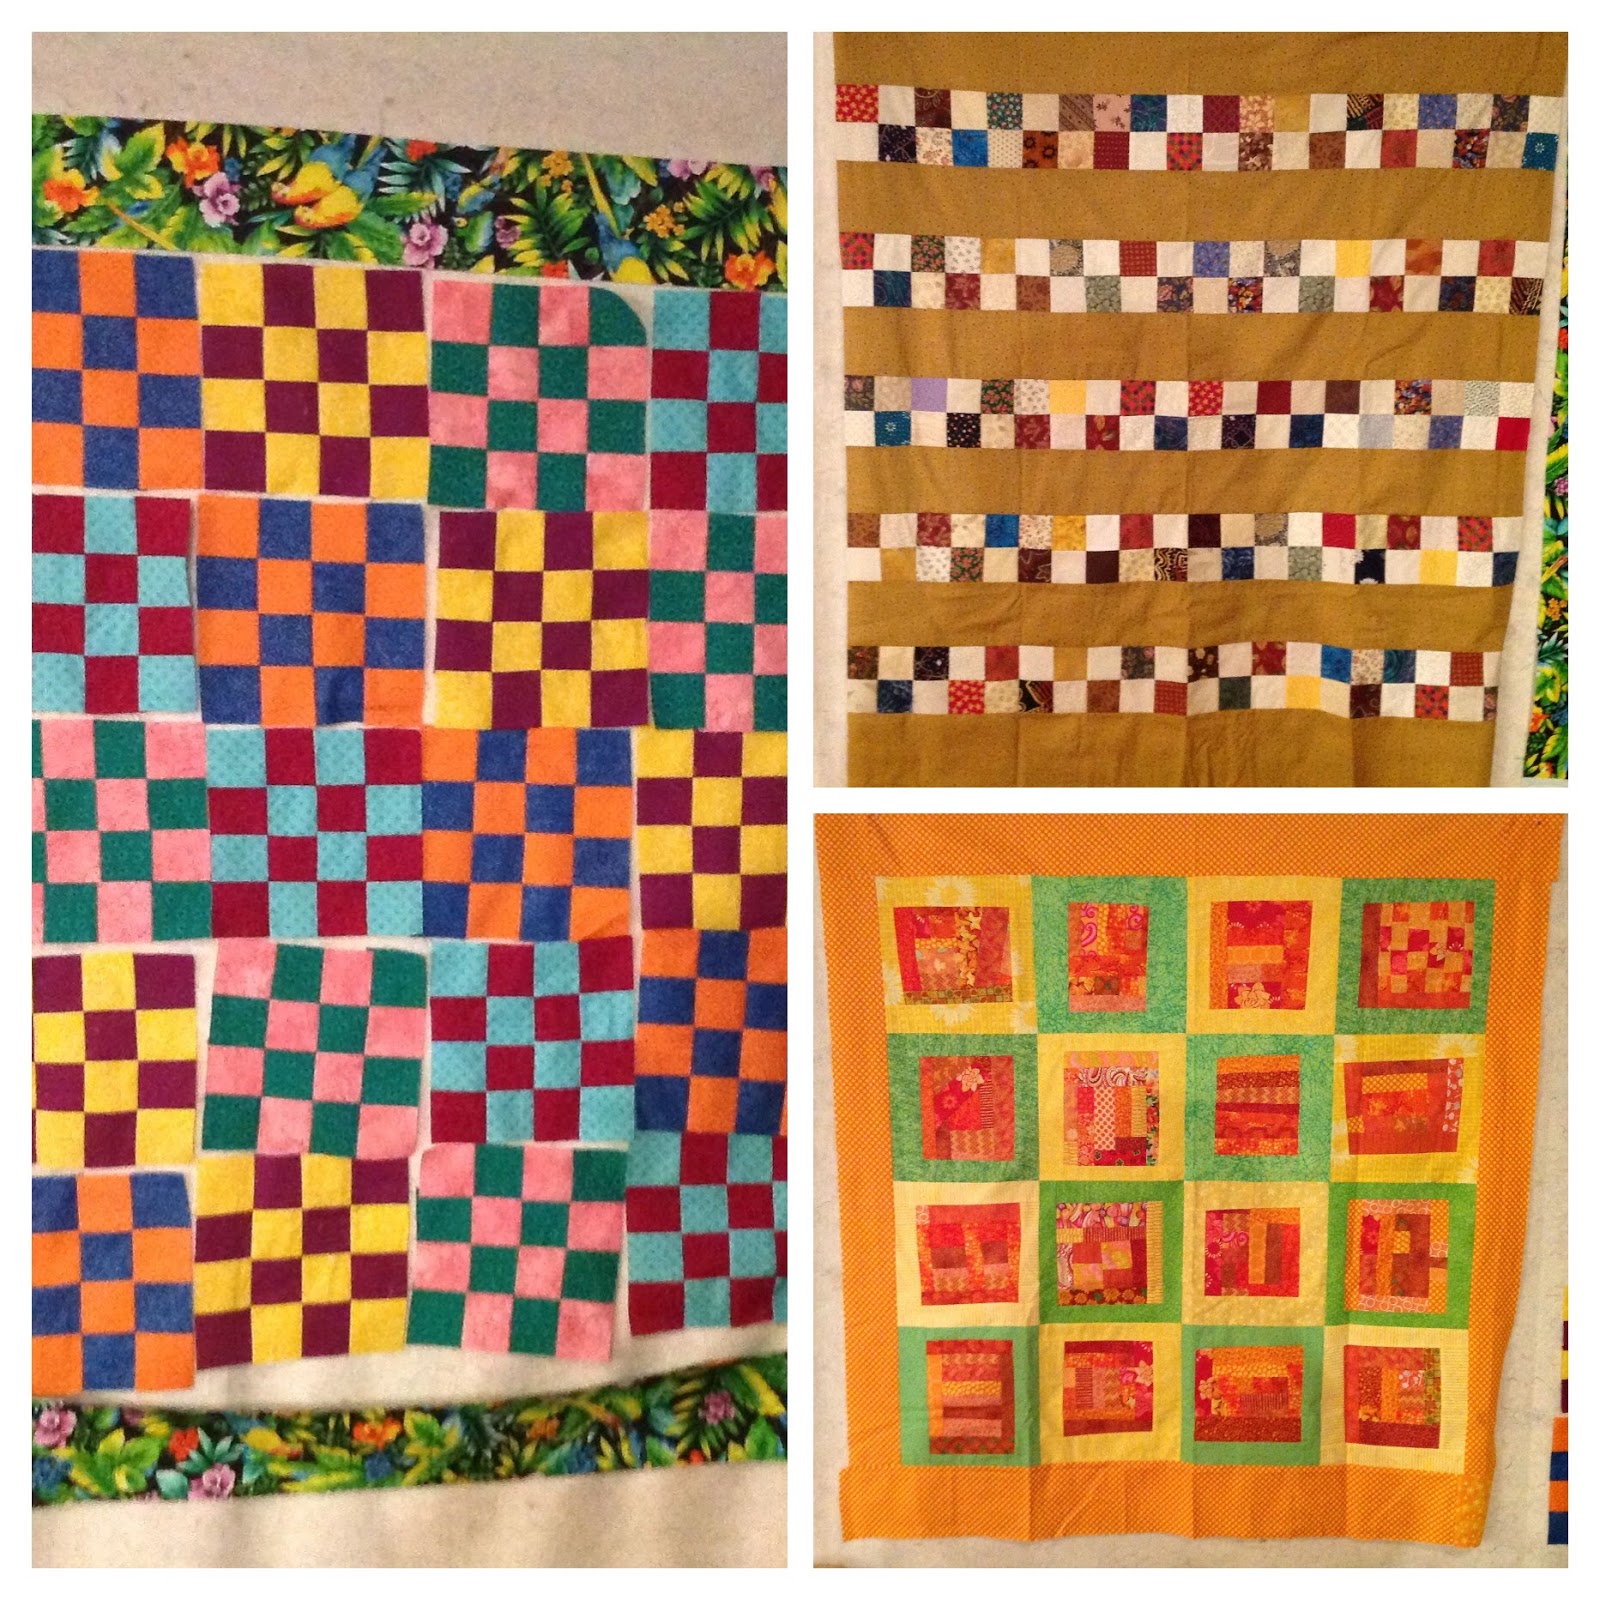 Kansas - Block 10 of 50 - Celebrating the States! - Block of the Month - a  4+ year quilt project! 